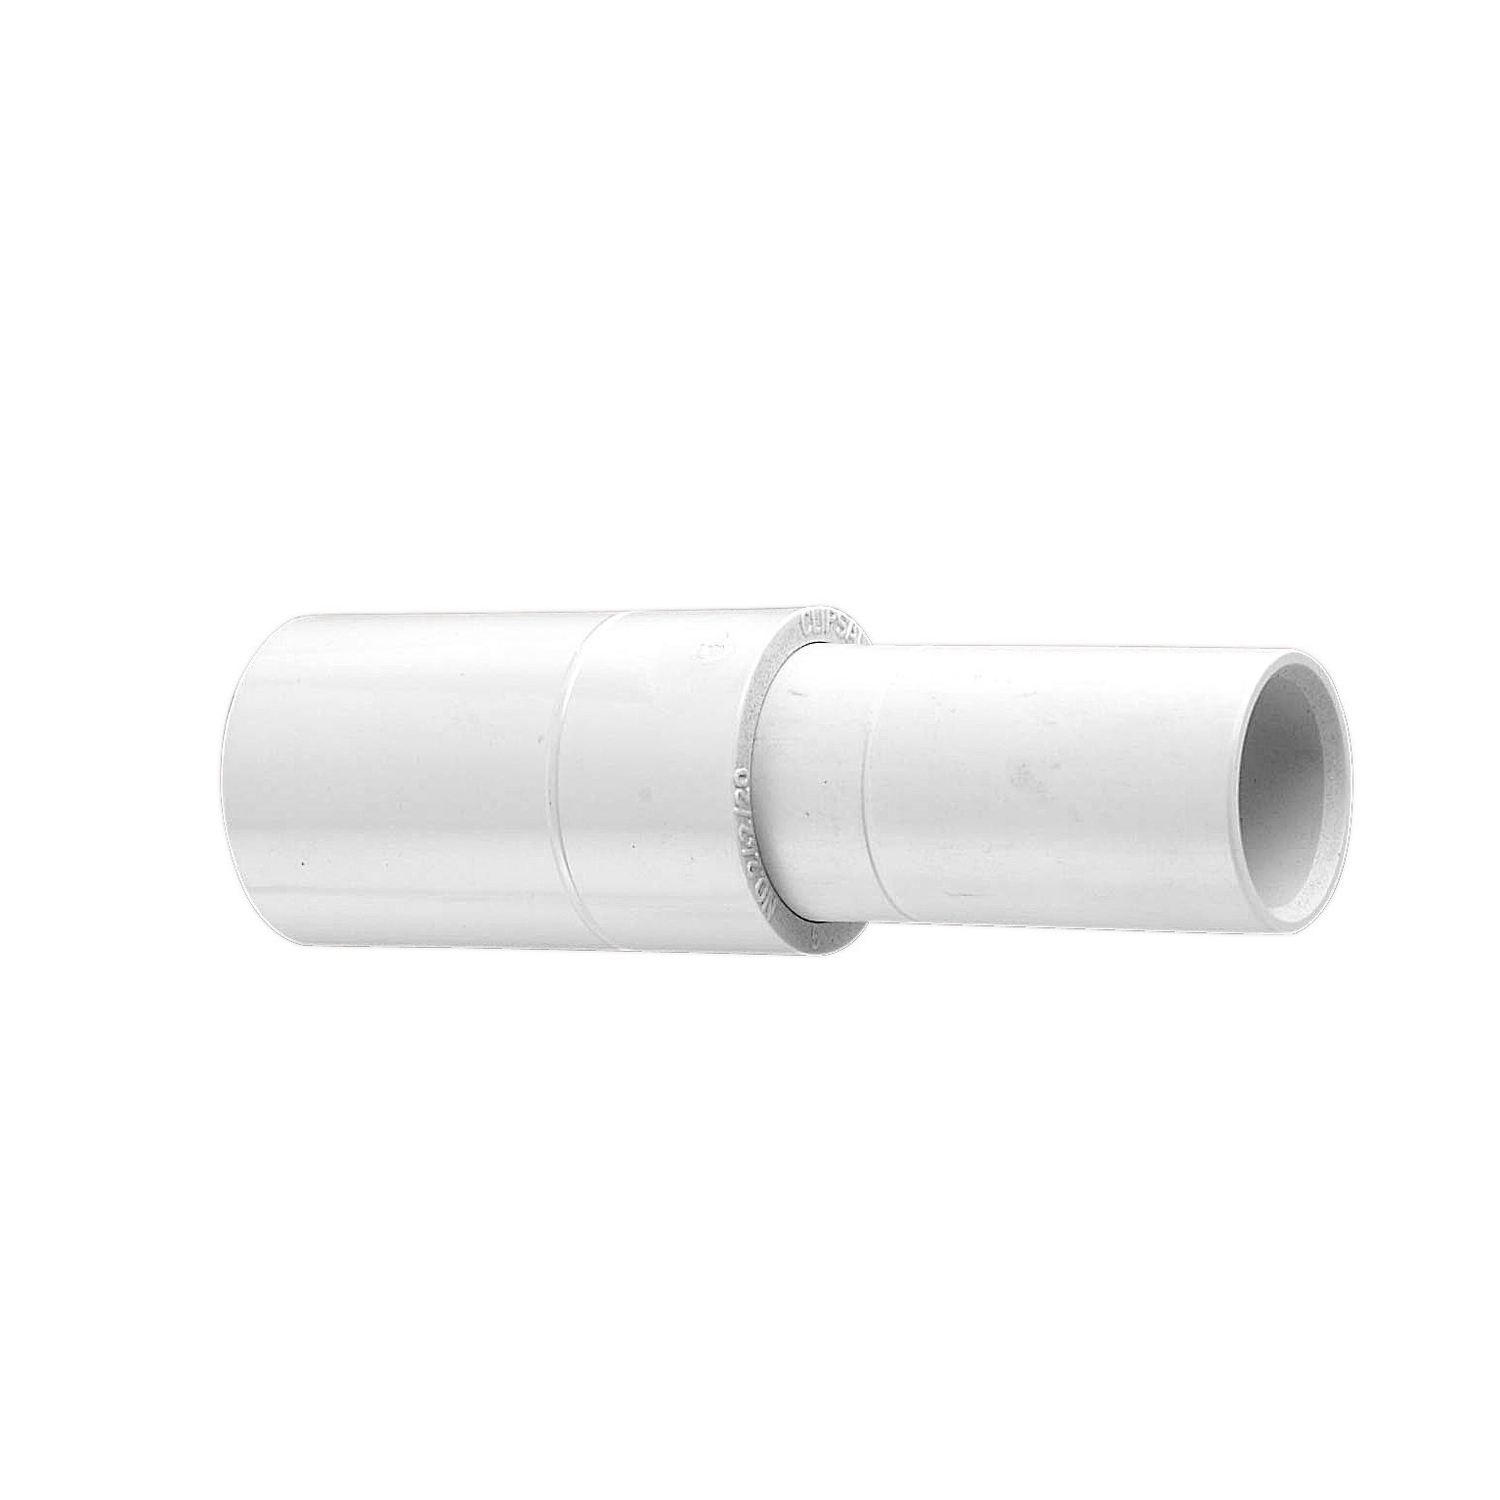 Solid Fittings - PVC, Expansion Couplings - Slip Type, 32mm, Grey